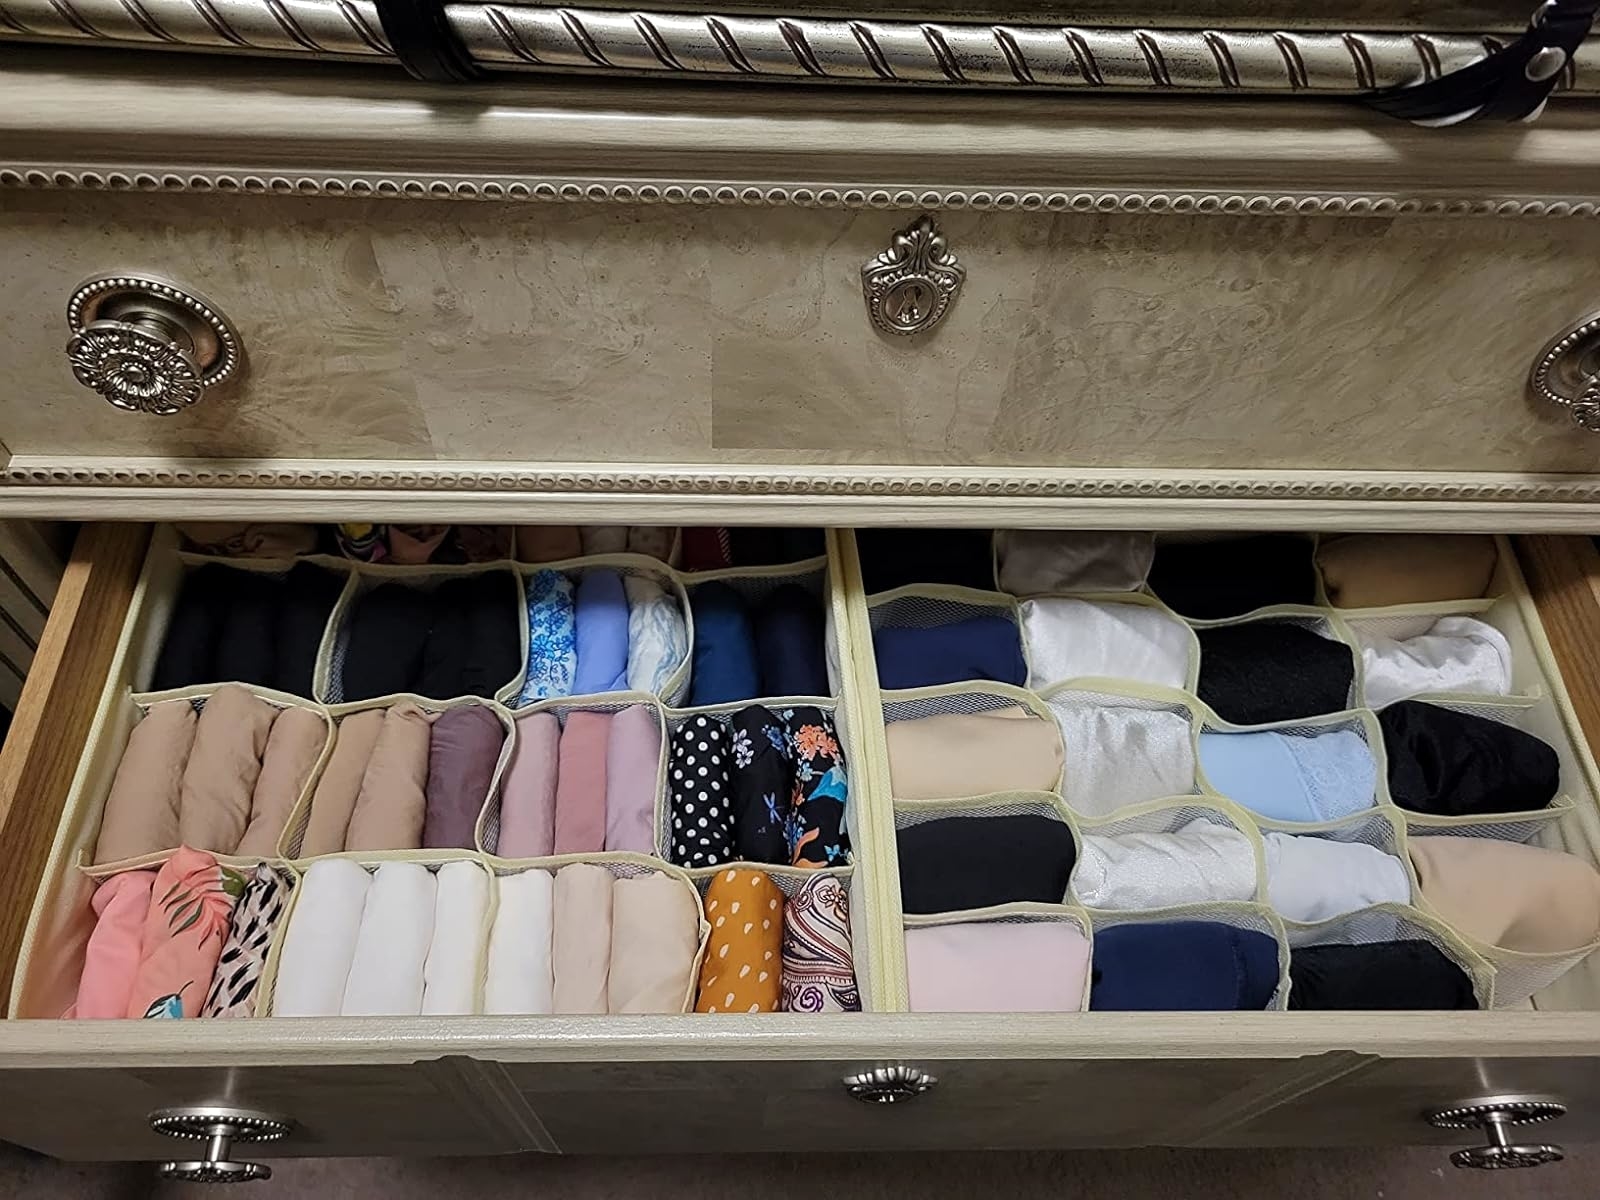 An open drawer organized with various folded socks in different styles and patterns for easy selection